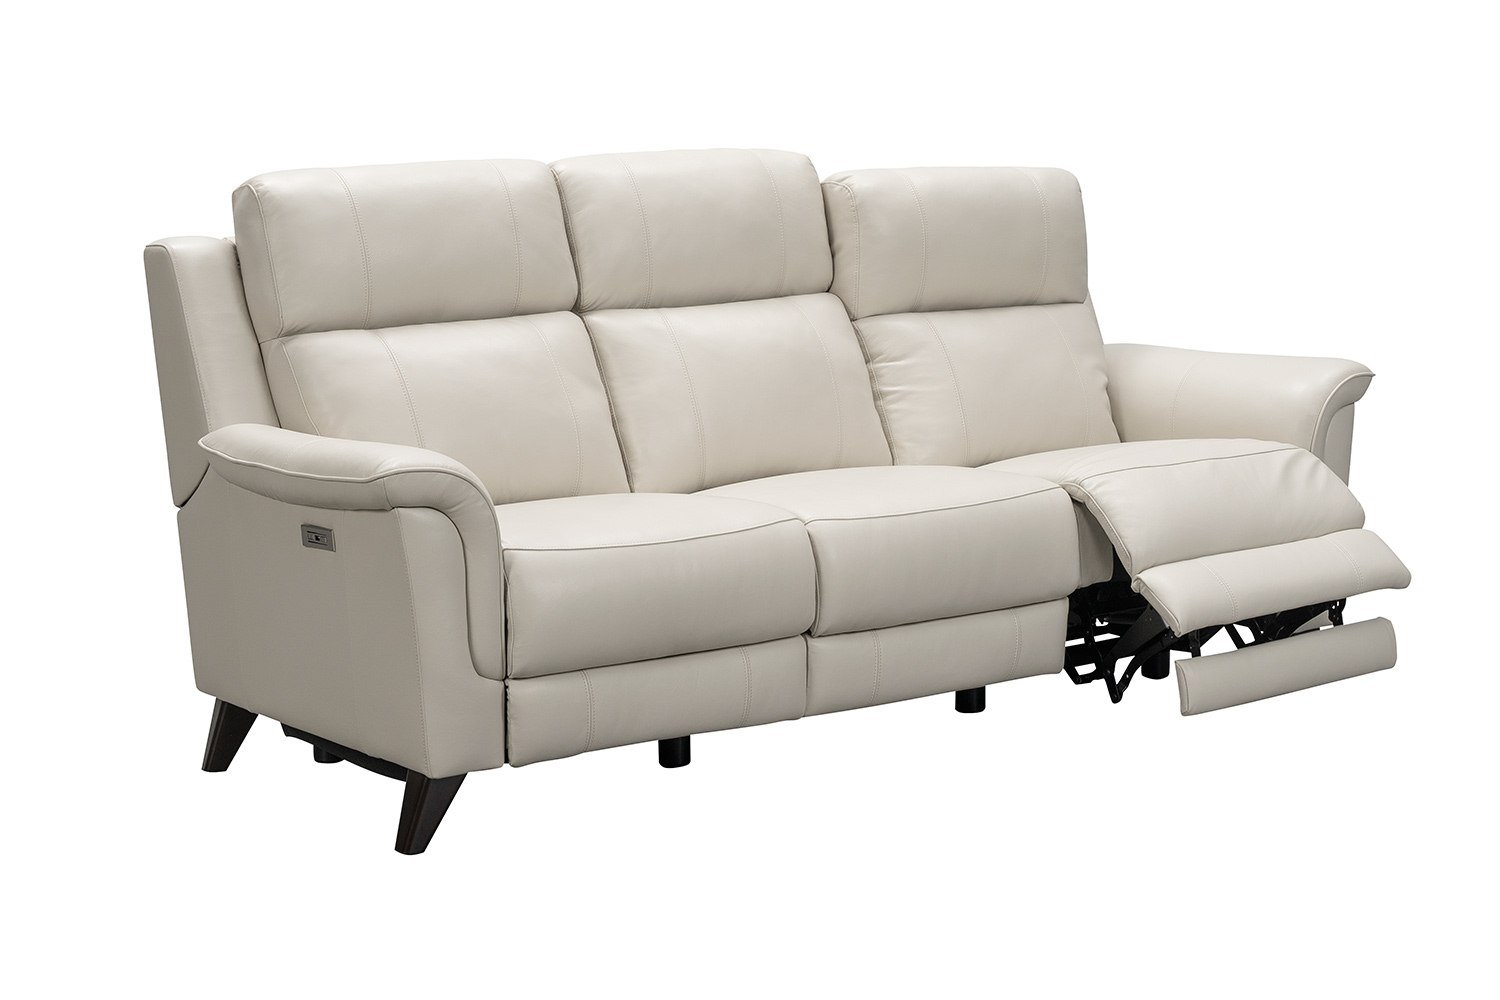 Barcalounger Kester Power Reclining Sofa with Power Head Rests - Laurel Cream/Leather match